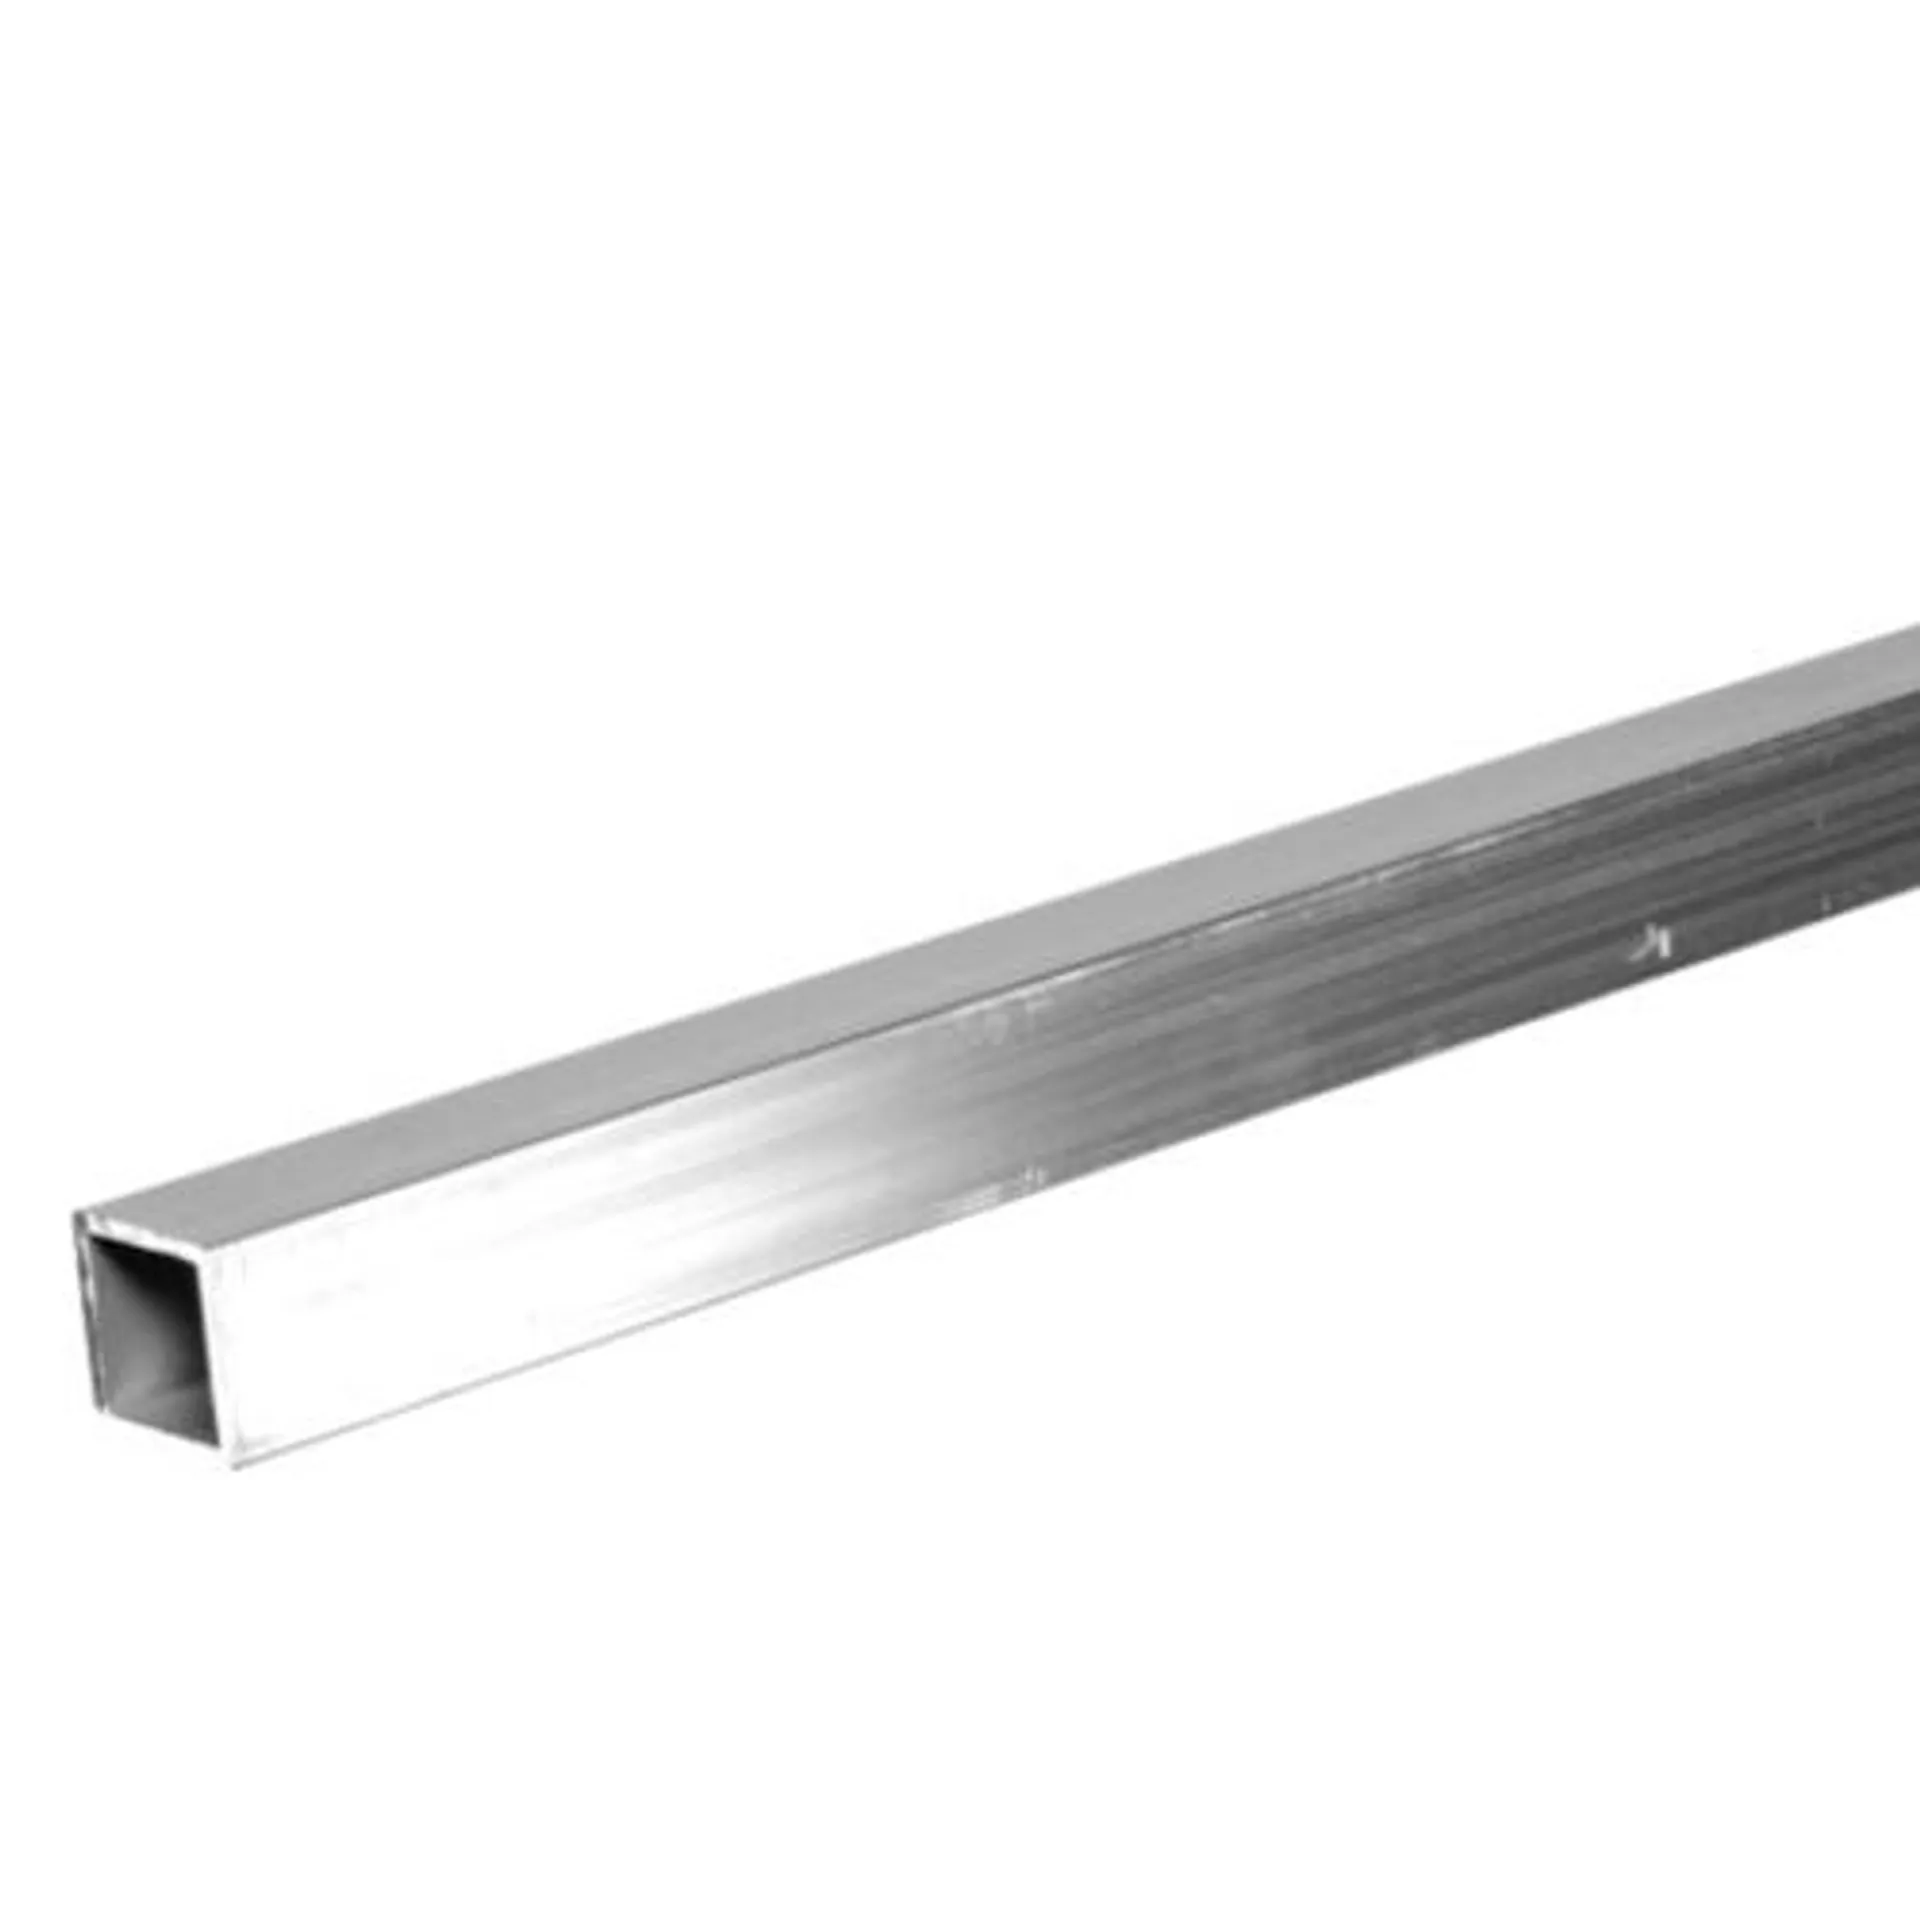 SteelWorks Weldable Aluminum Square Tube